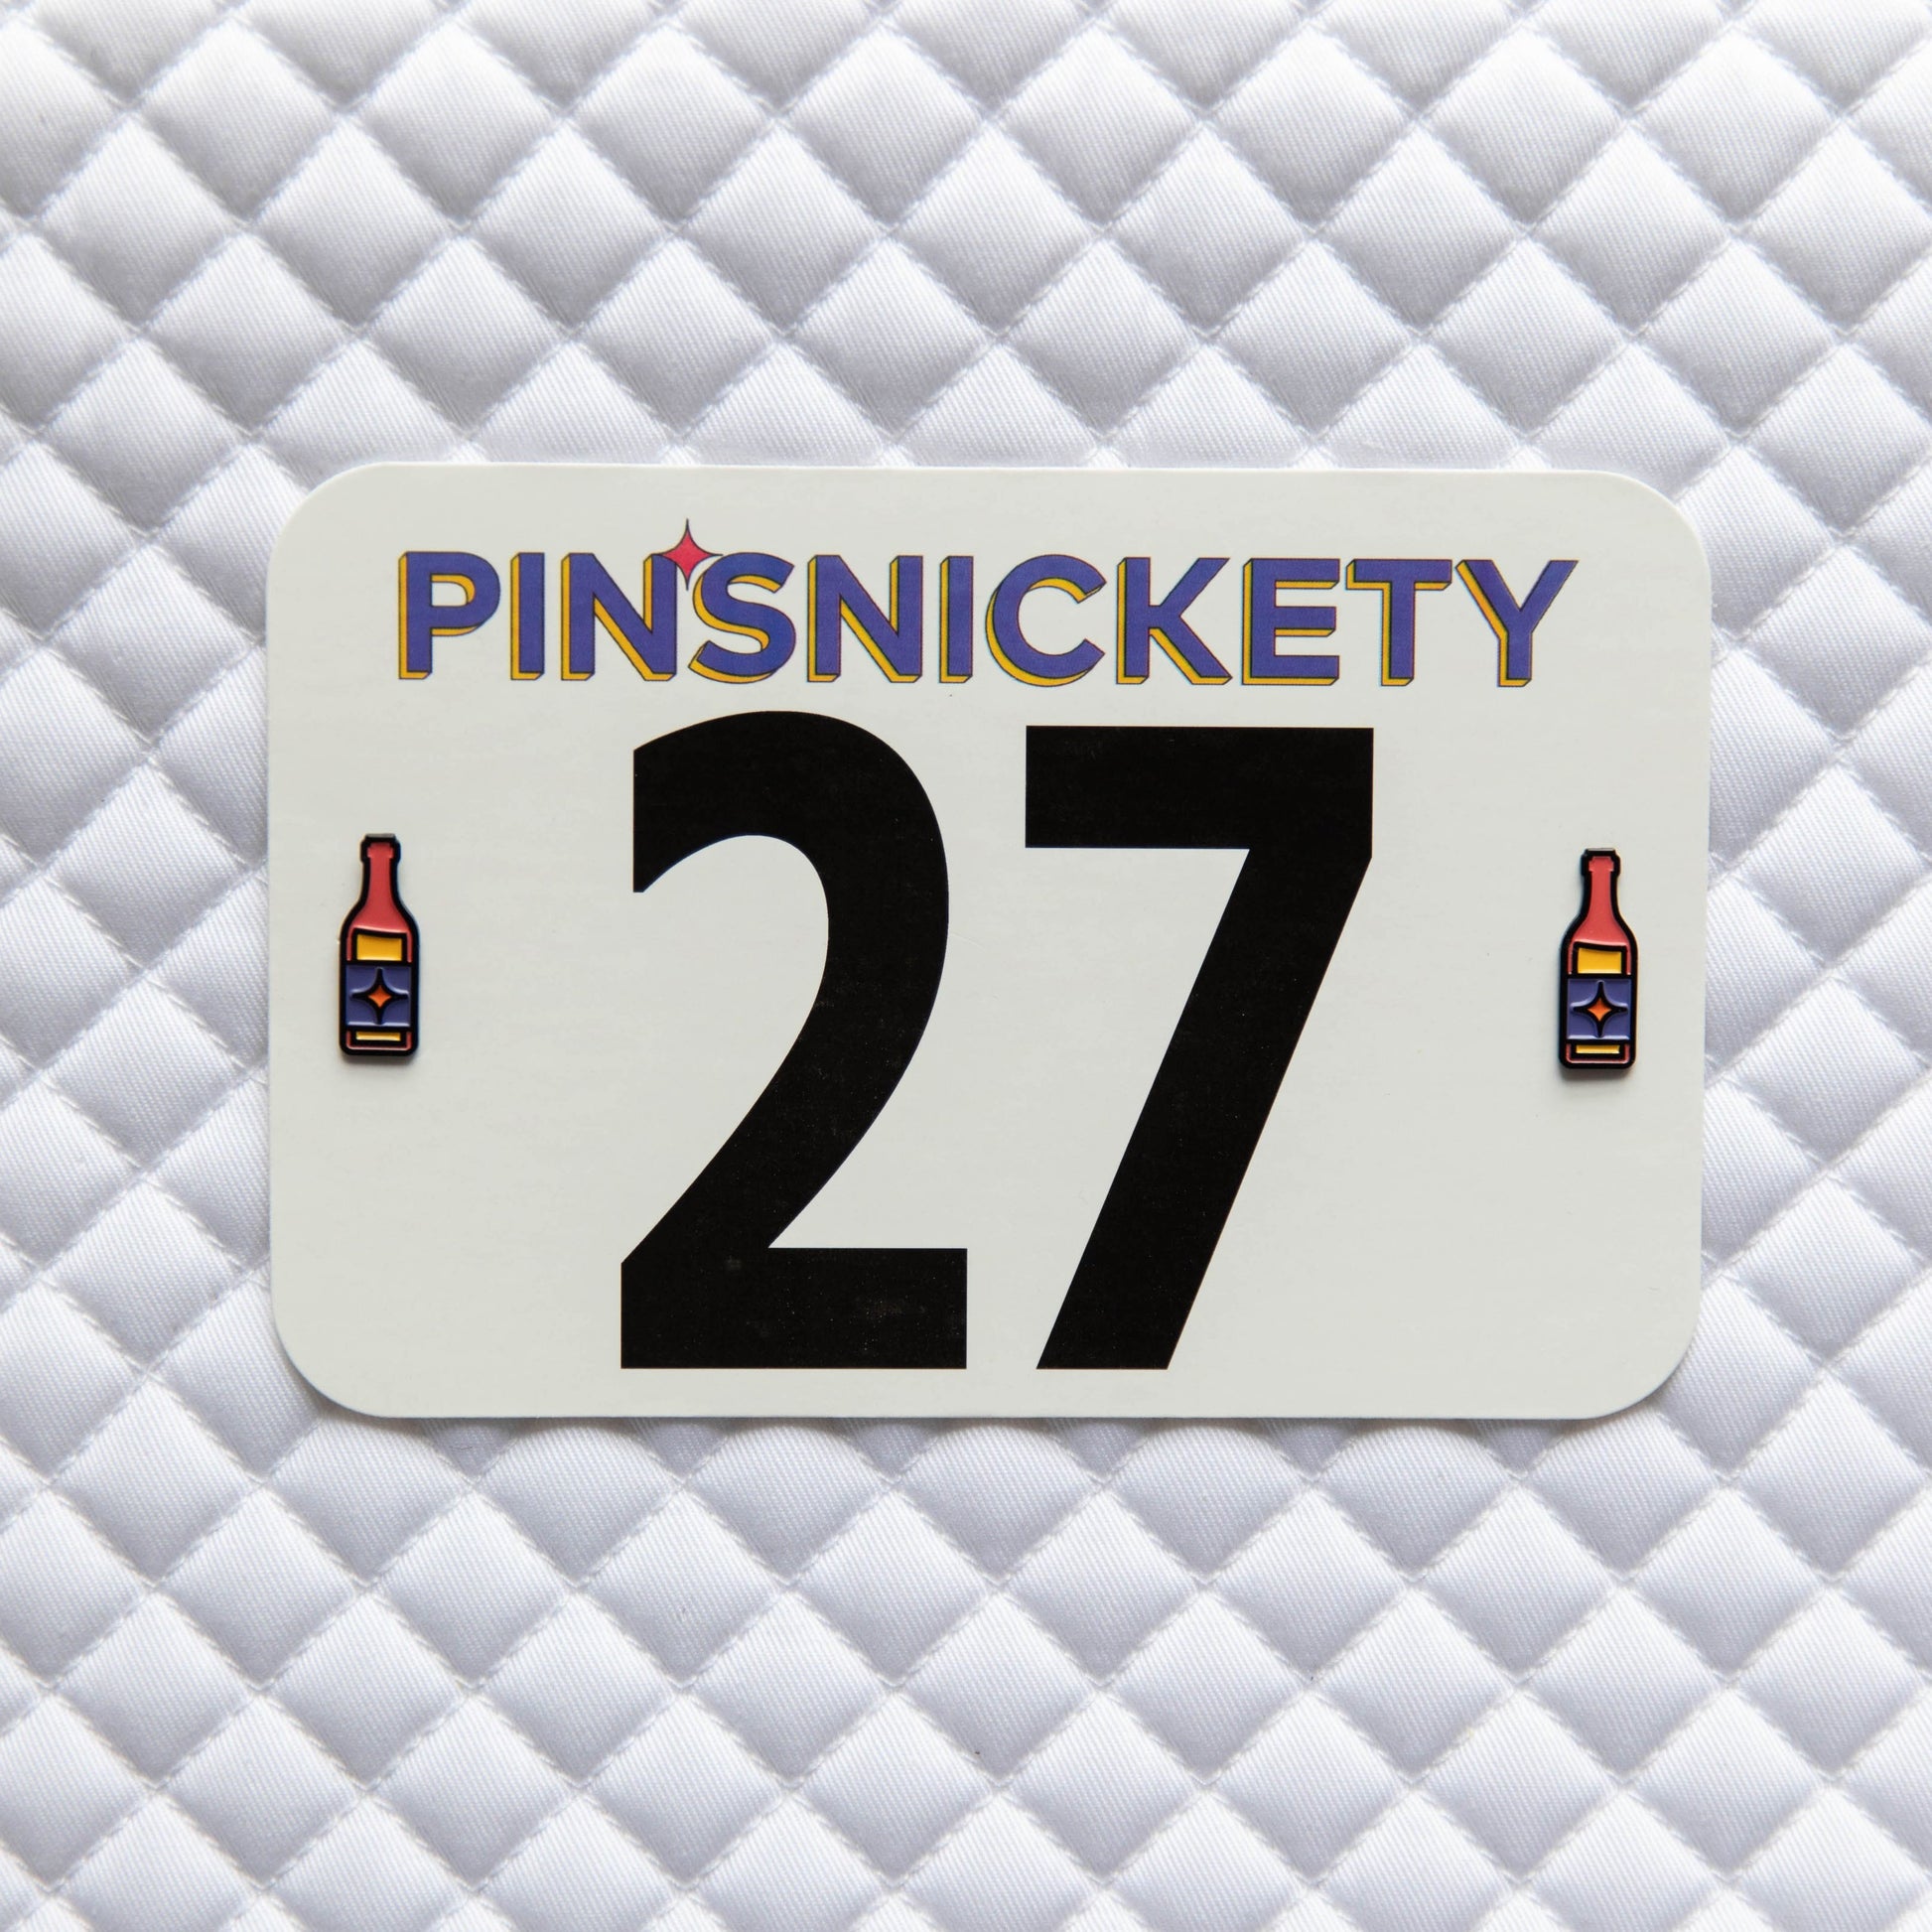 Pinsnickety Hot Sauce horse show number pins on a saddle pad